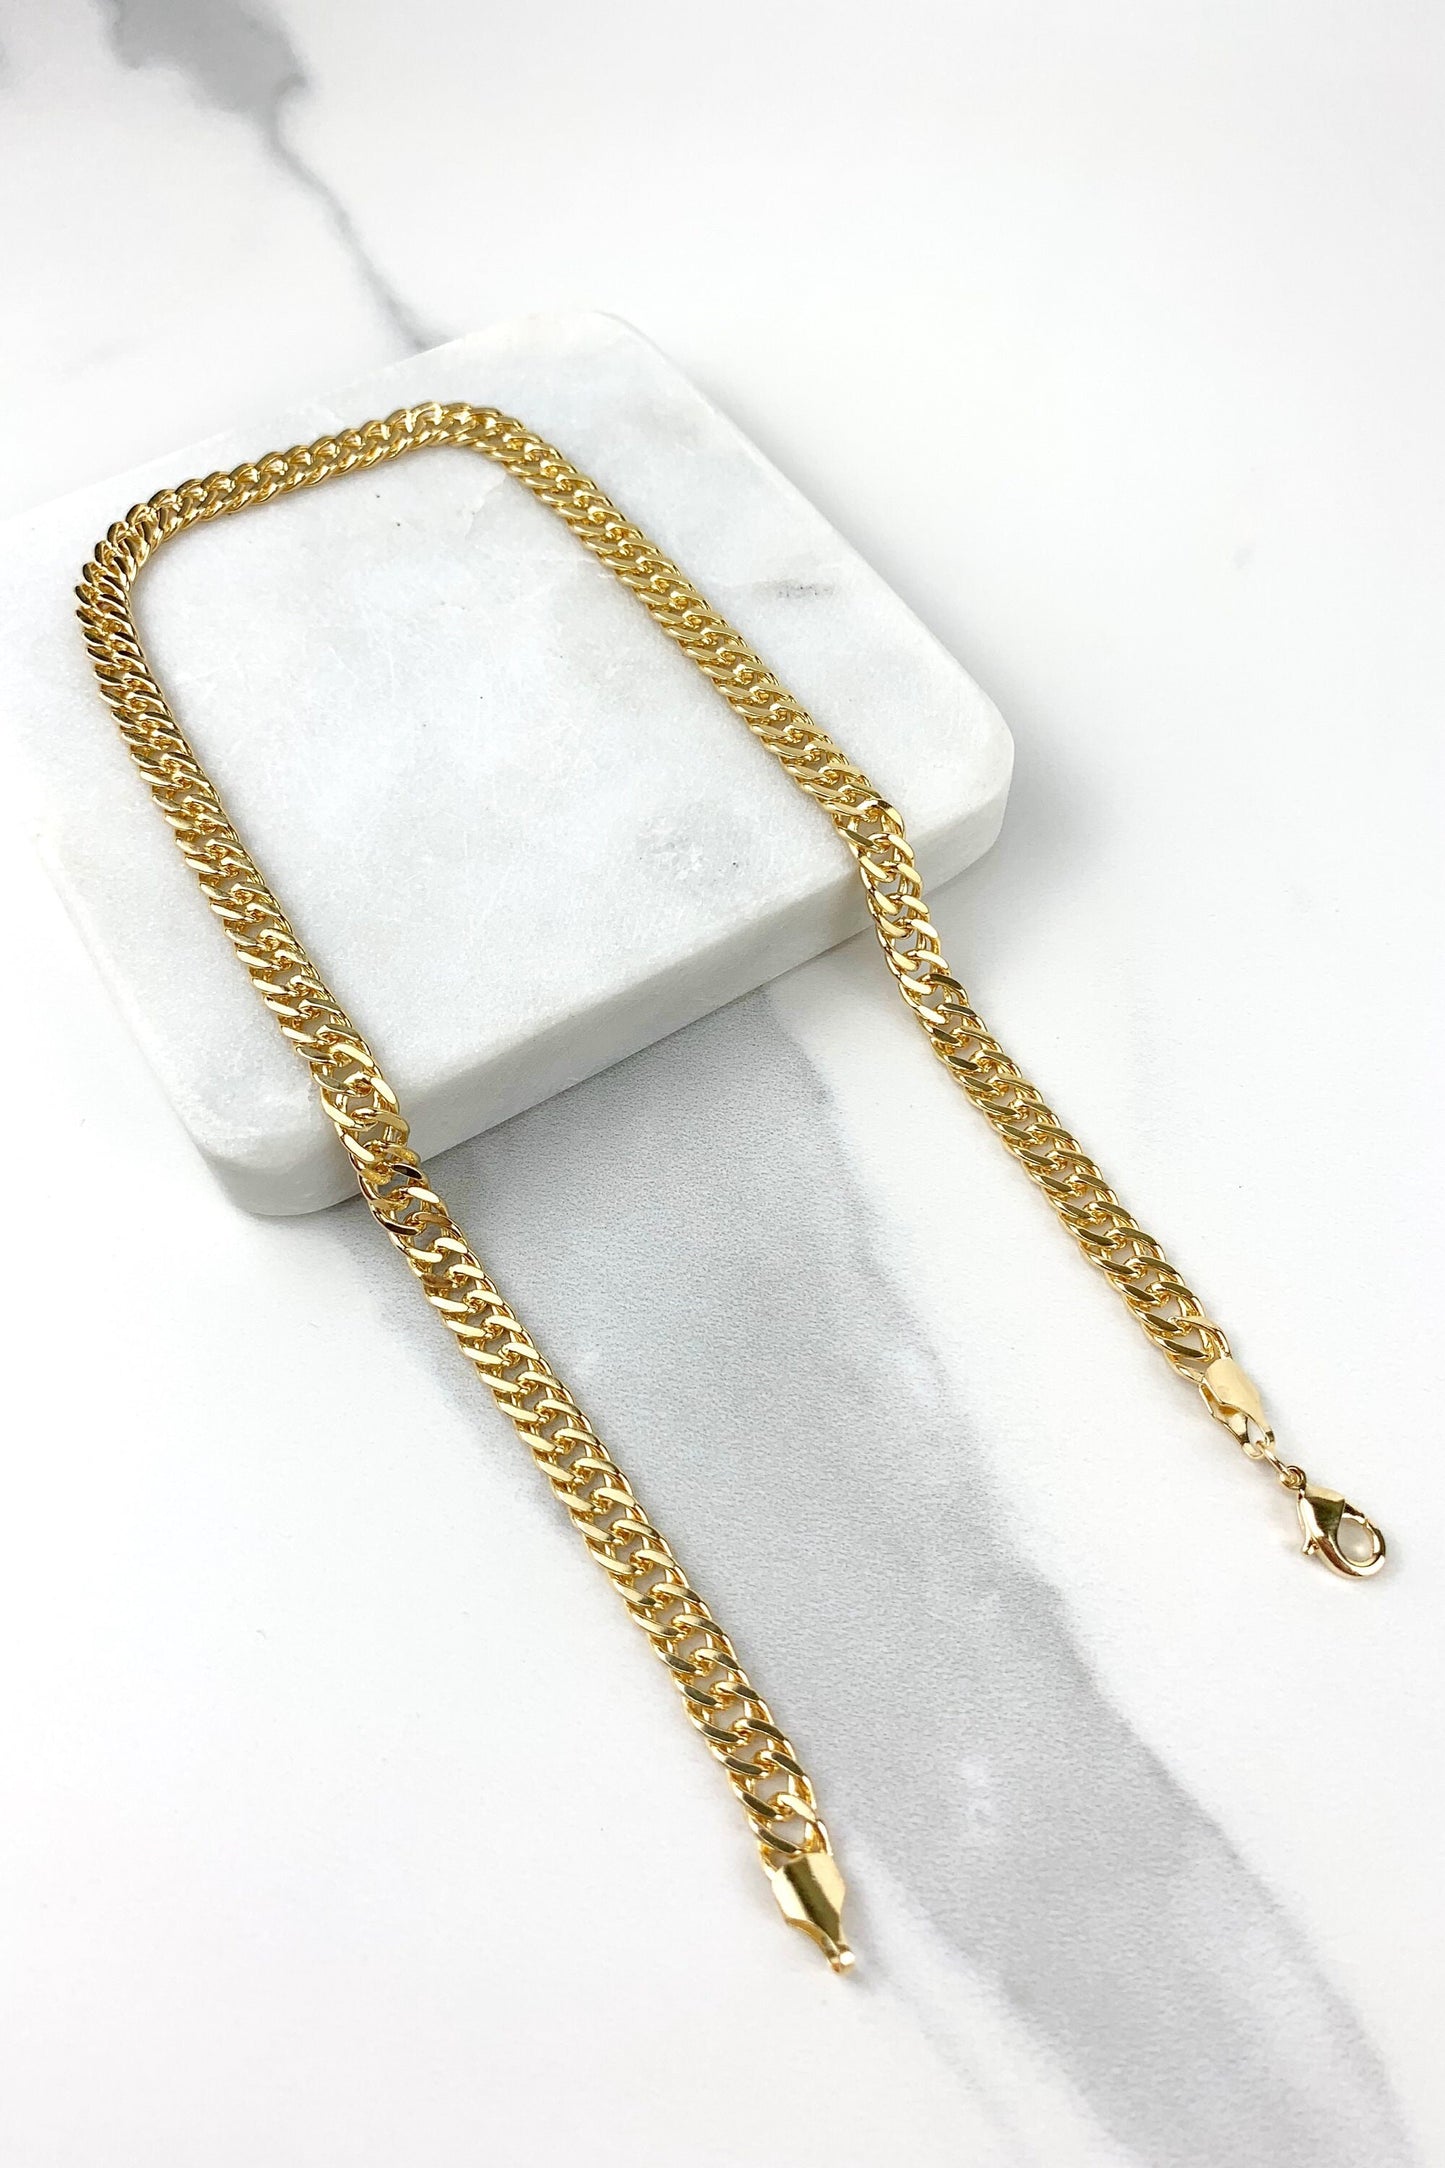 18k Gold Filled Cub Link Chain Pave Spiral Necklace Wholesale Jewelry Supplies